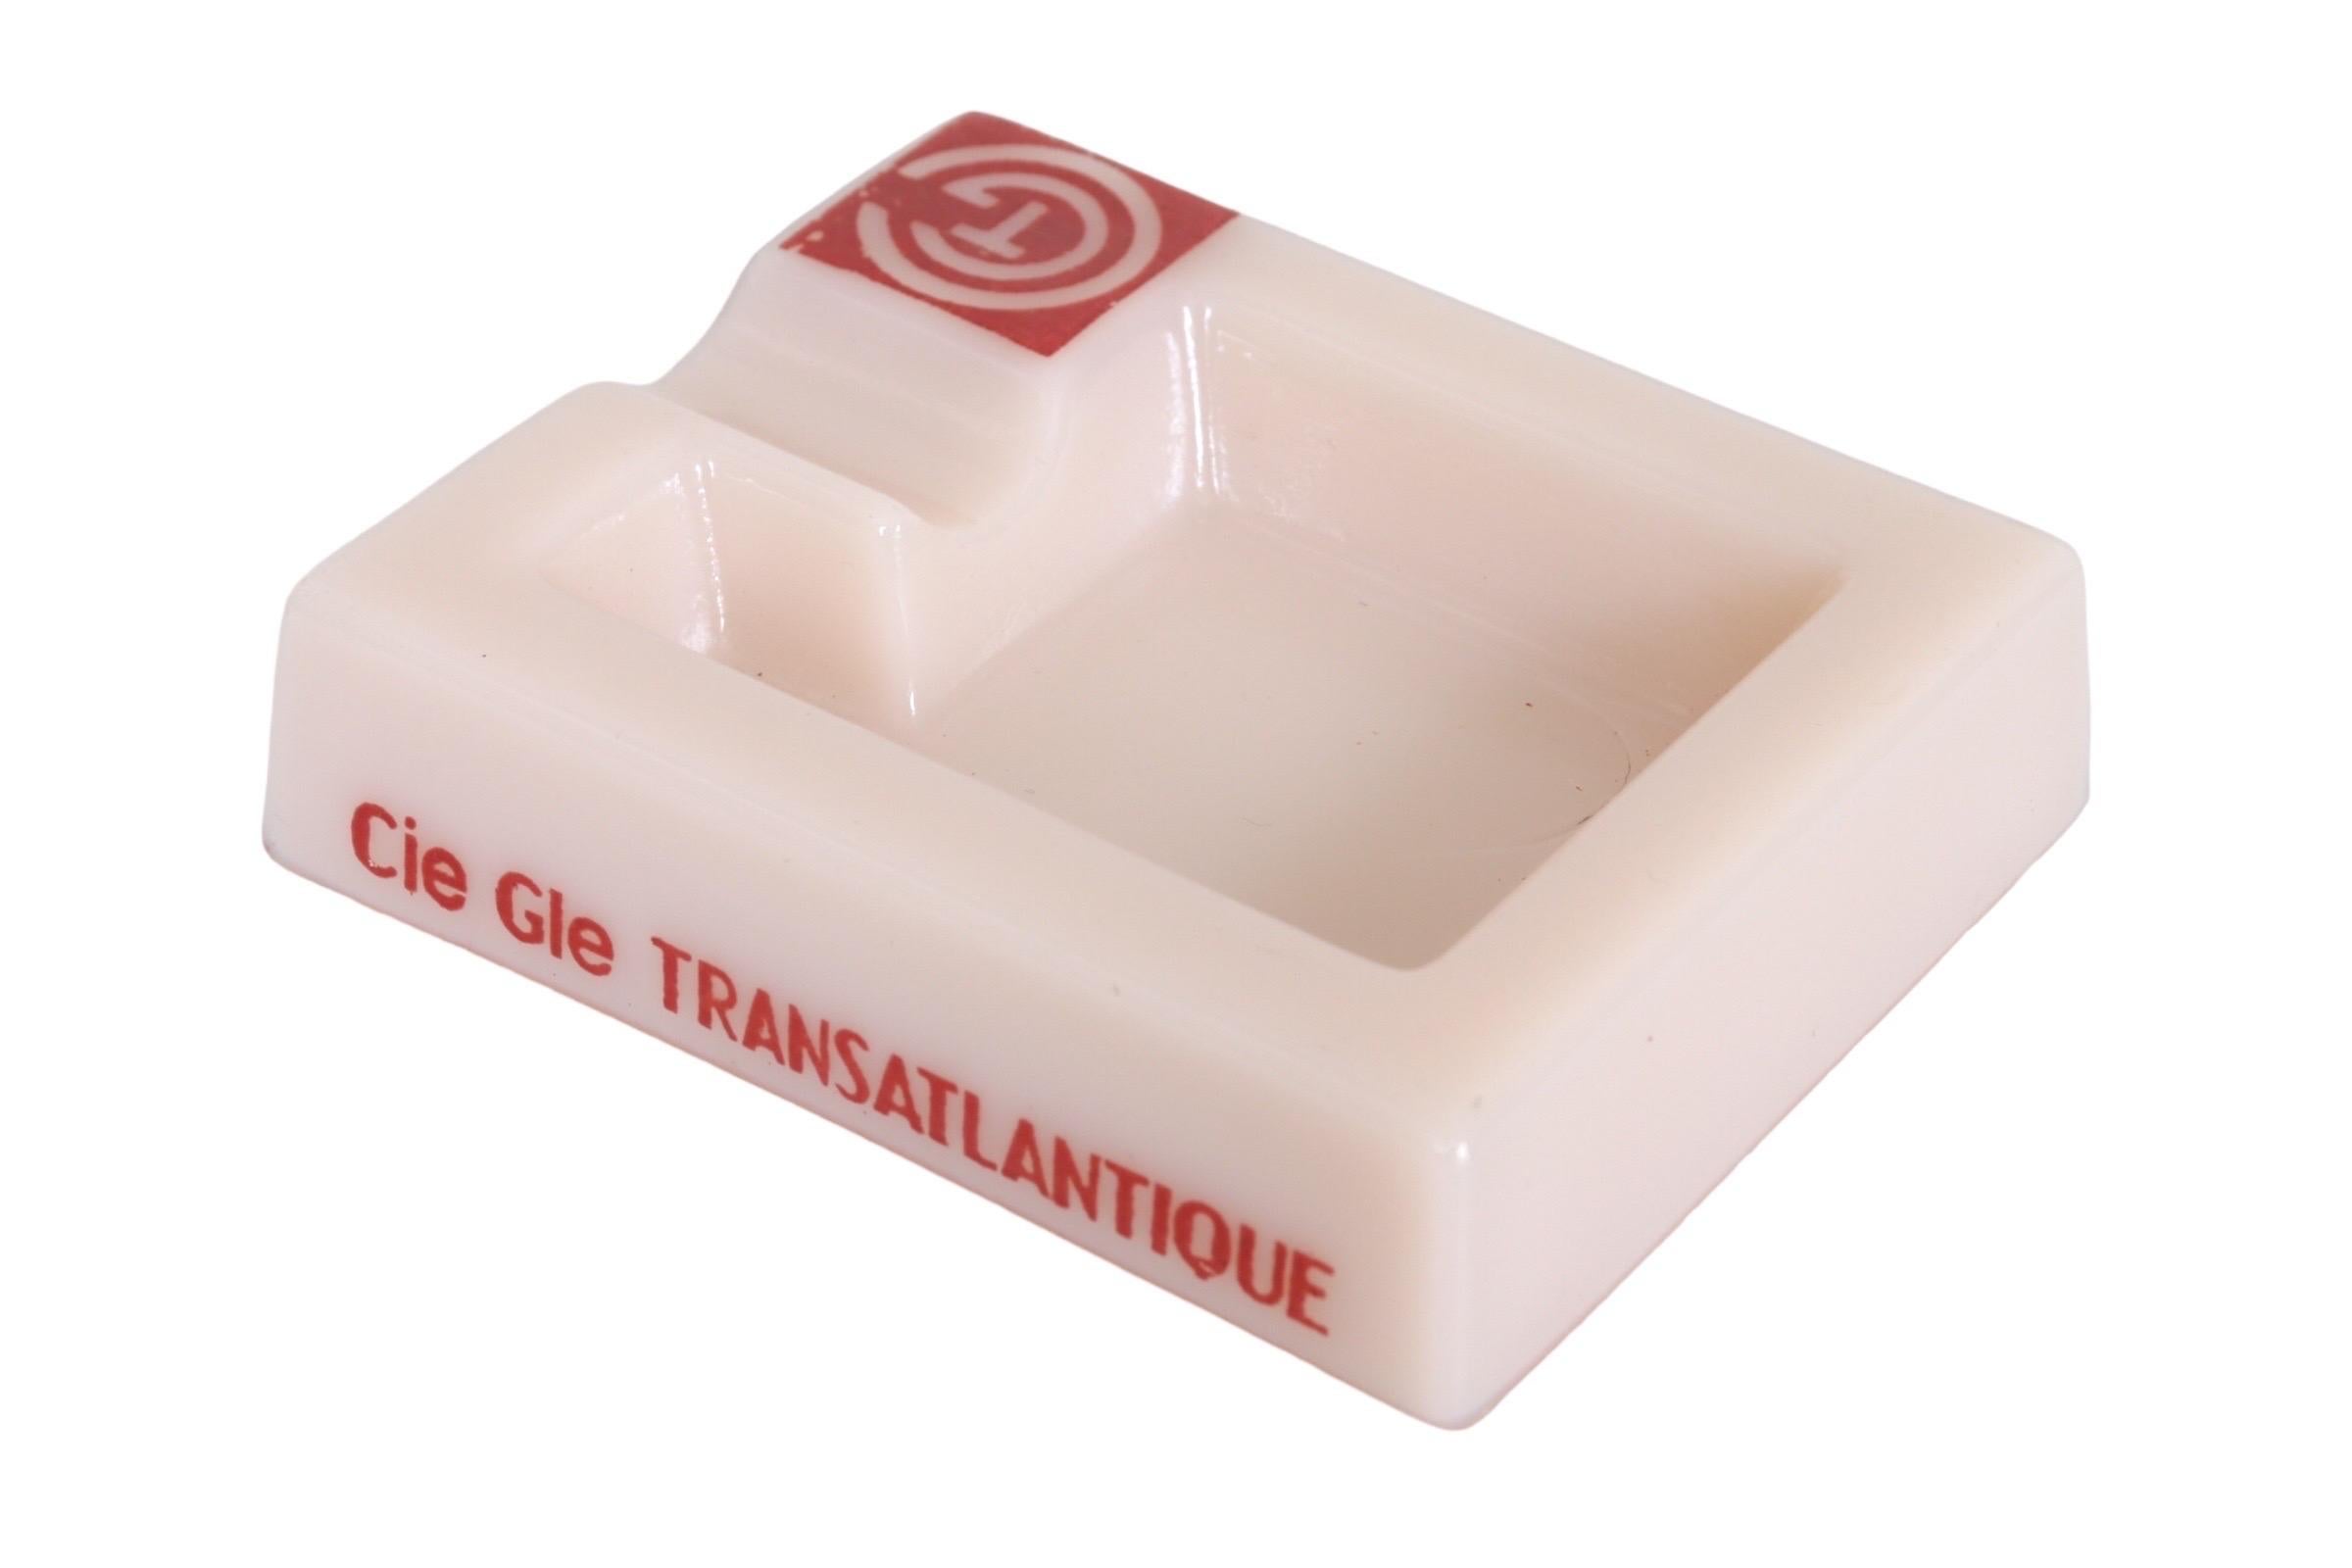 A French Line branded rectangular ashtray by French shipping company Compagnie Générale Transatlantique, known overseas as the French Line. Made of blush colored opalex with a single beveled cigarette rest on the right above the company’s logo; a T